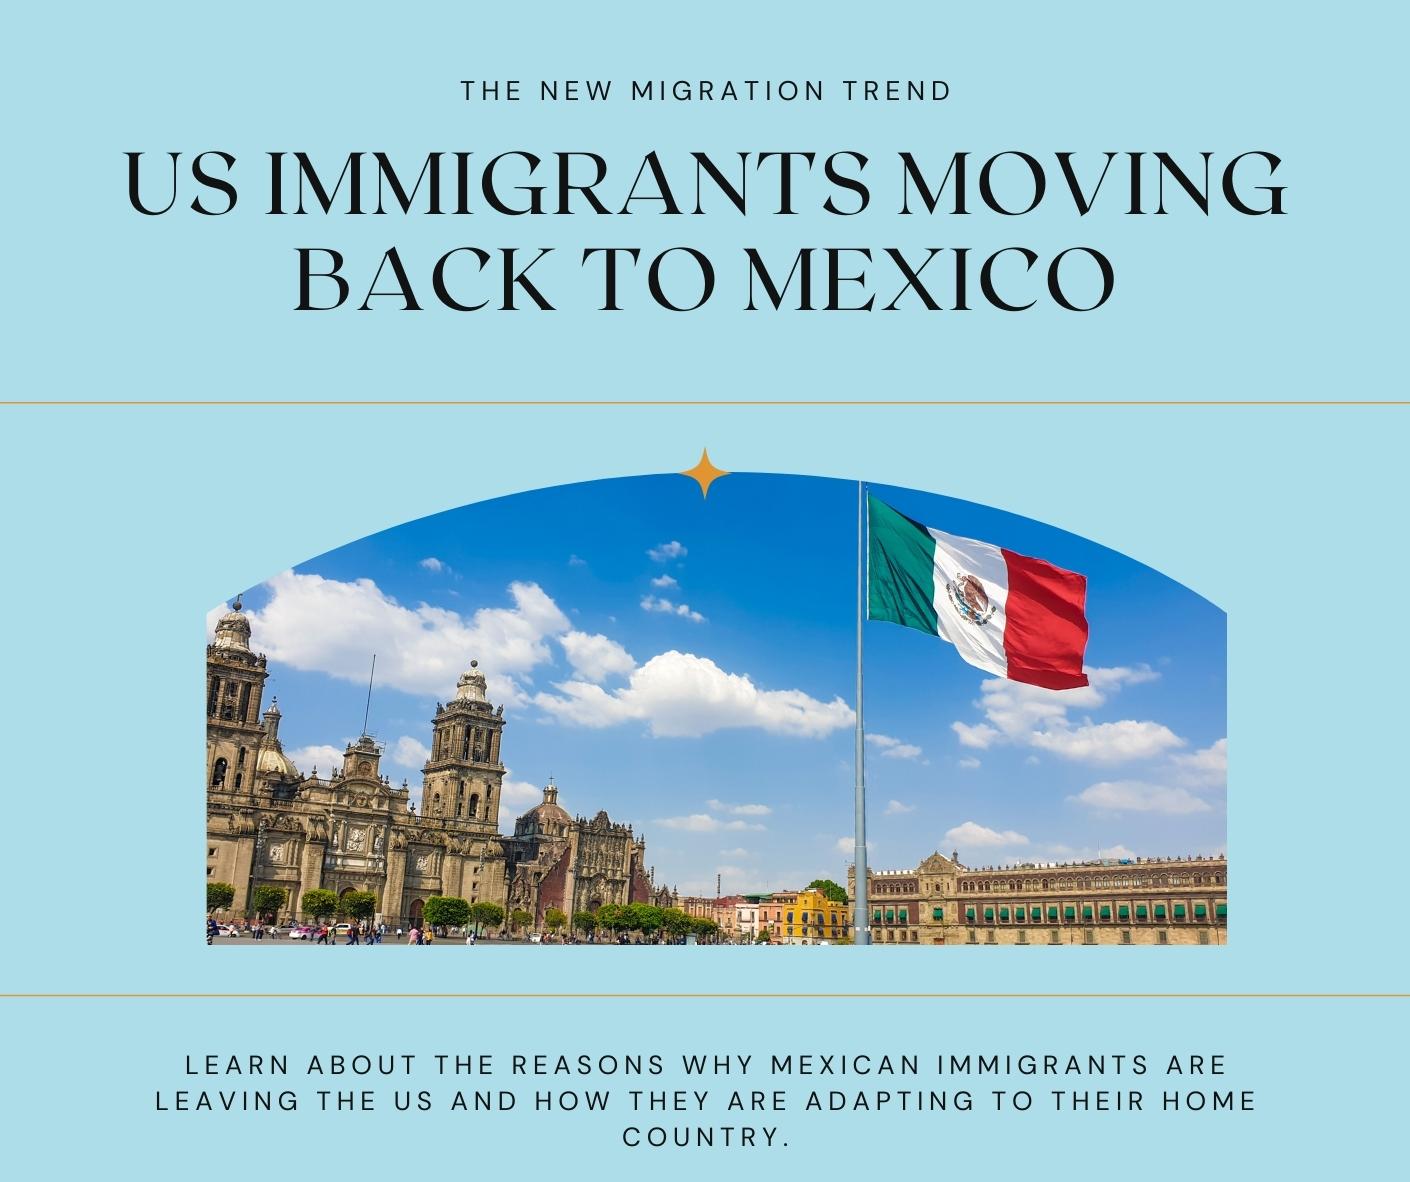 5 Reasons Behind US Immigrants Voluntary Return to Mexico